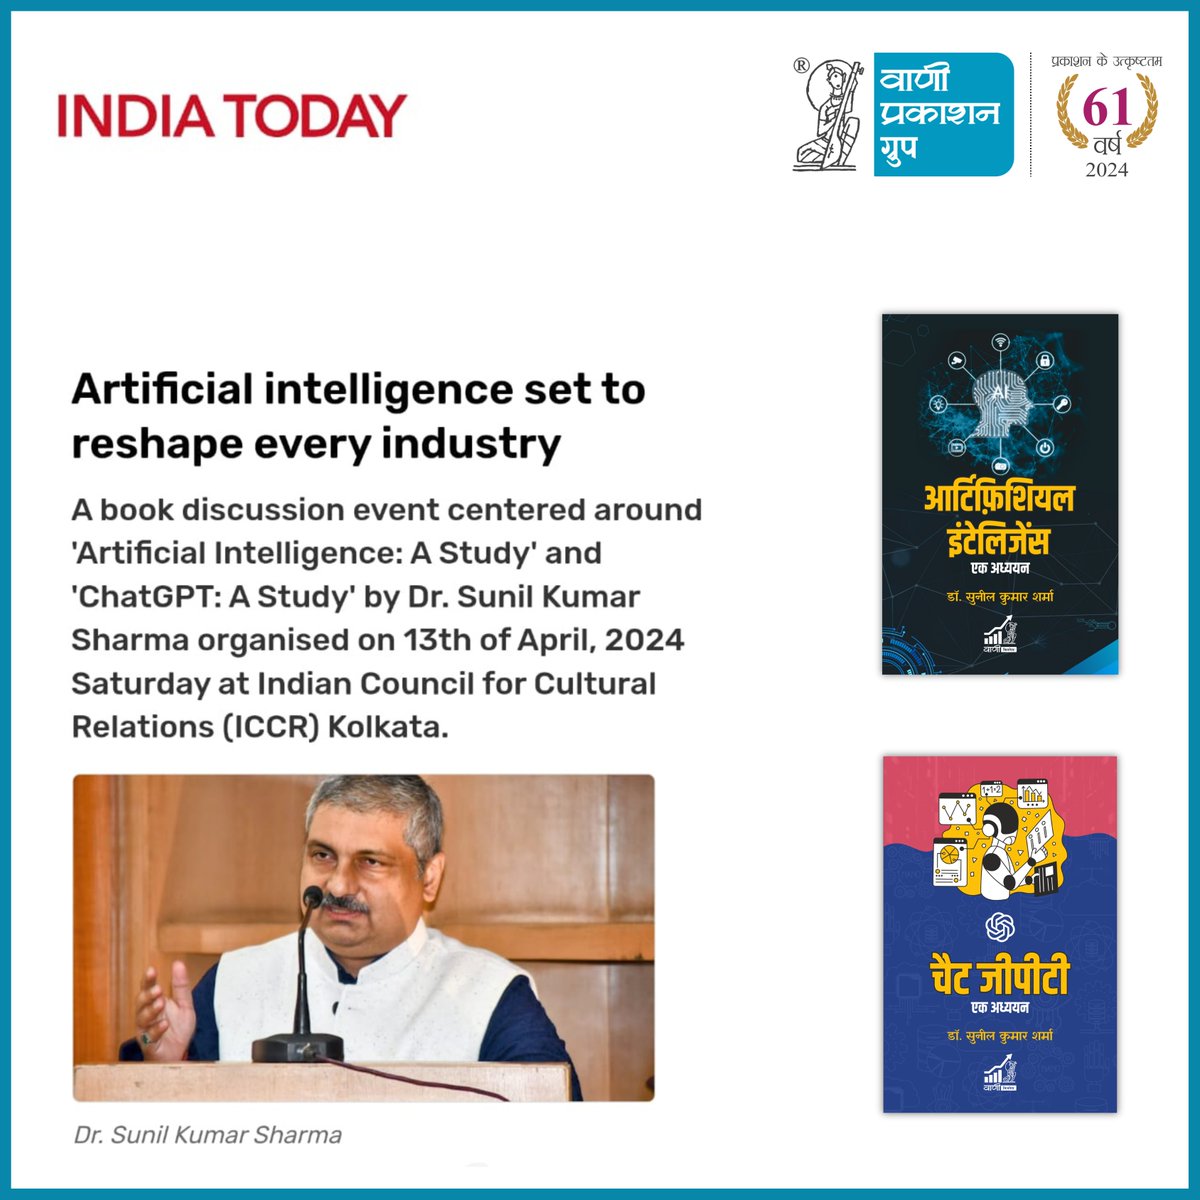 #InNews 

A book discussion event centered around 'Artificial Intelligence: A Study' and 'ChatGPT: A Study' by Dr. Sunil Kumar Sharma was organized on Saturday, April 13, 2024, at the Indian Council for Cultural Relations (ICCR) in Kolkata.

The book is published by Vani…